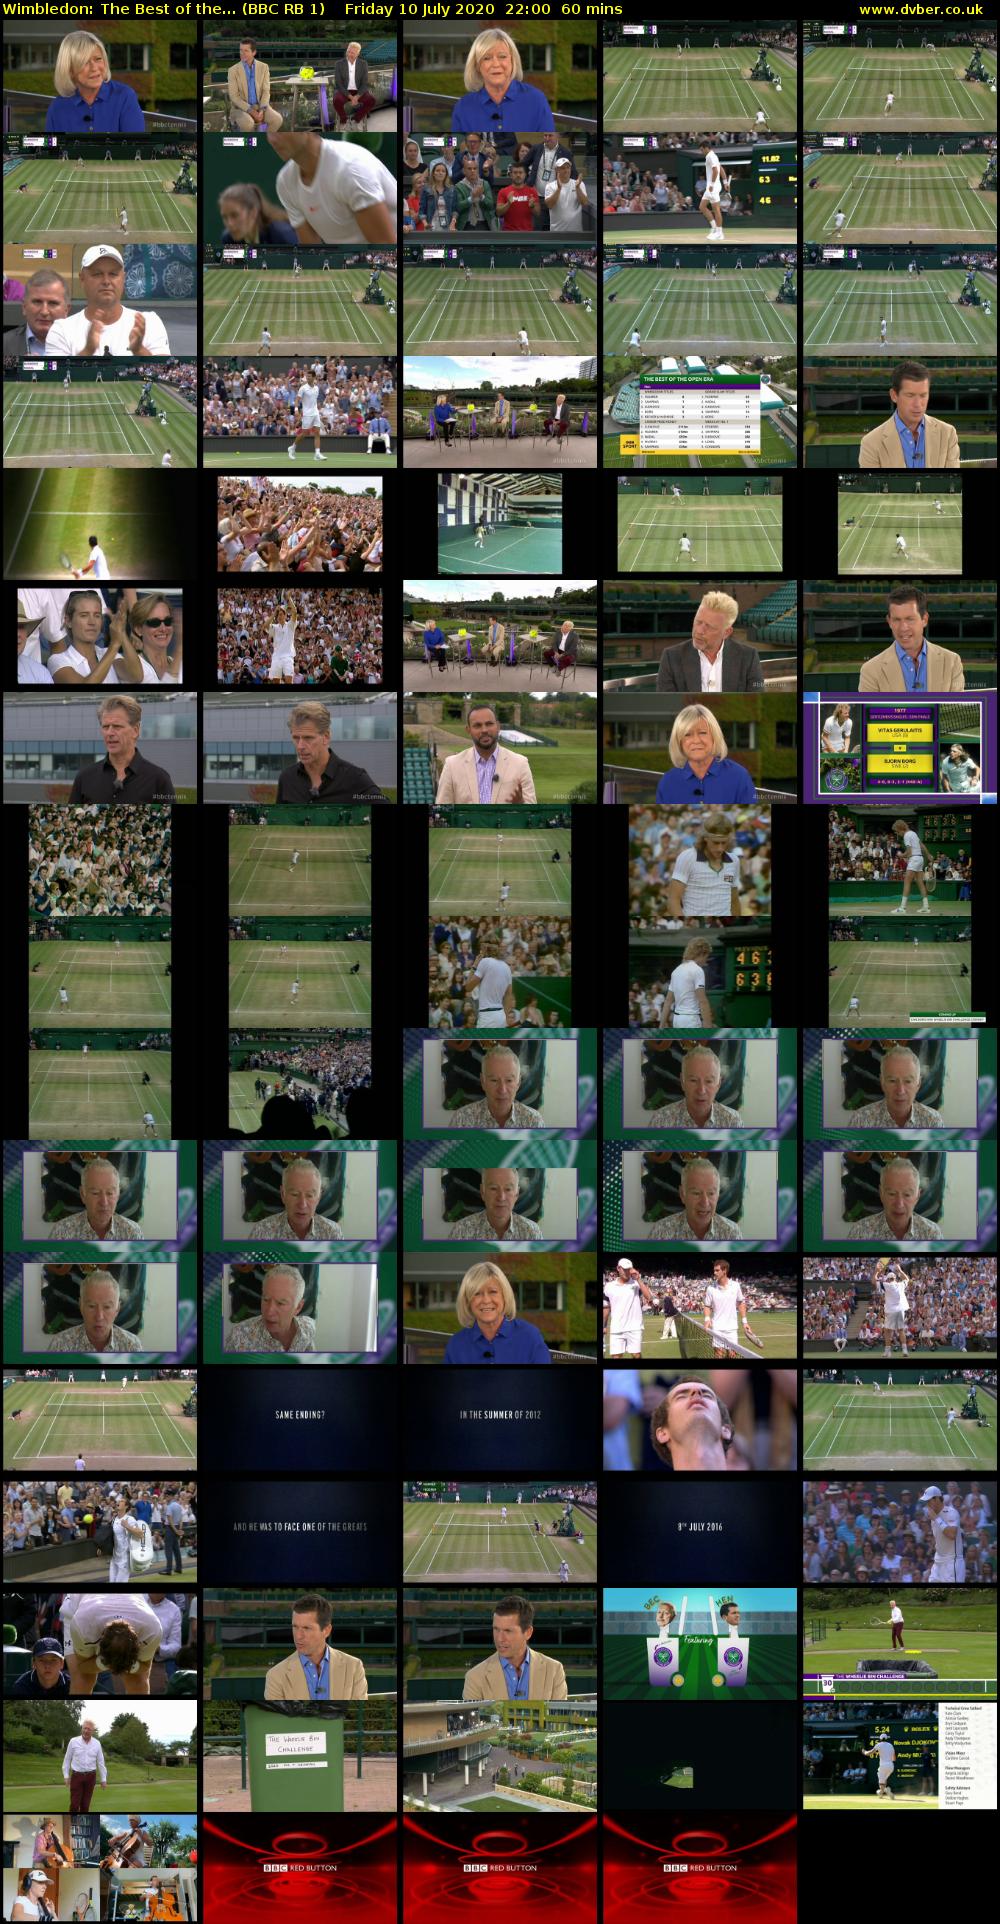 Wimbledon: The Best of the... (BBC RB 1) Friday 10 July 2020 22:00 - 23:00